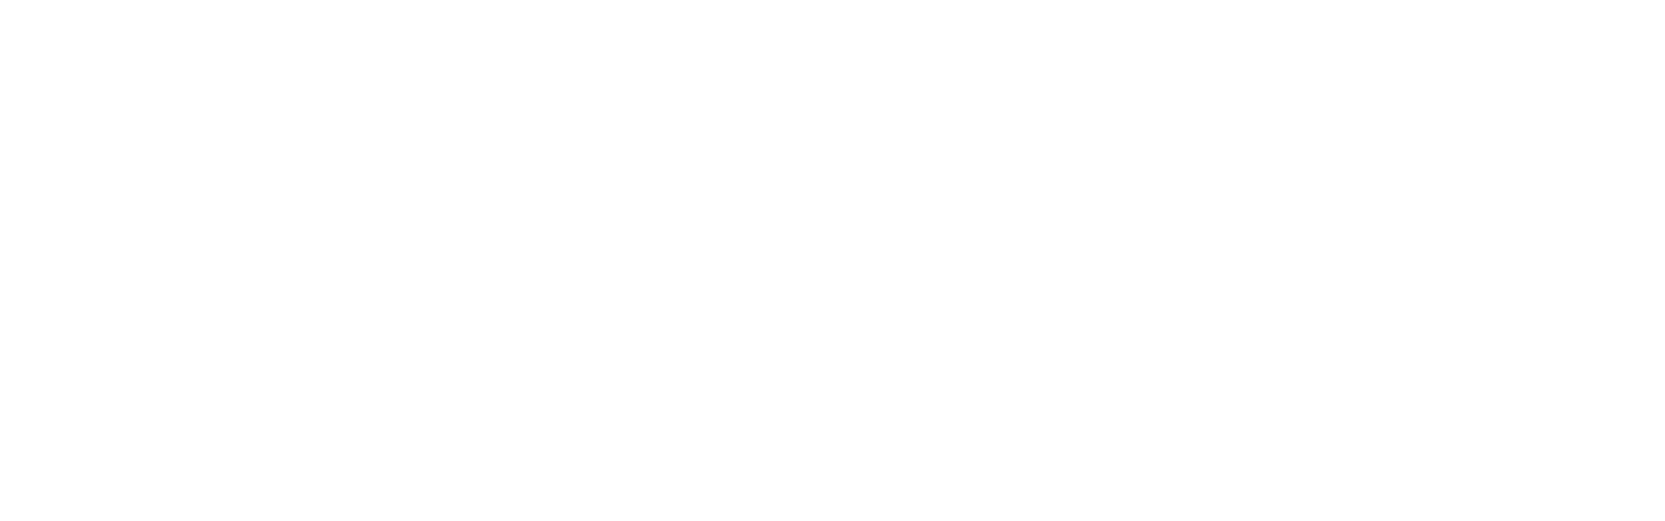 Preforming home inspections in KC metro